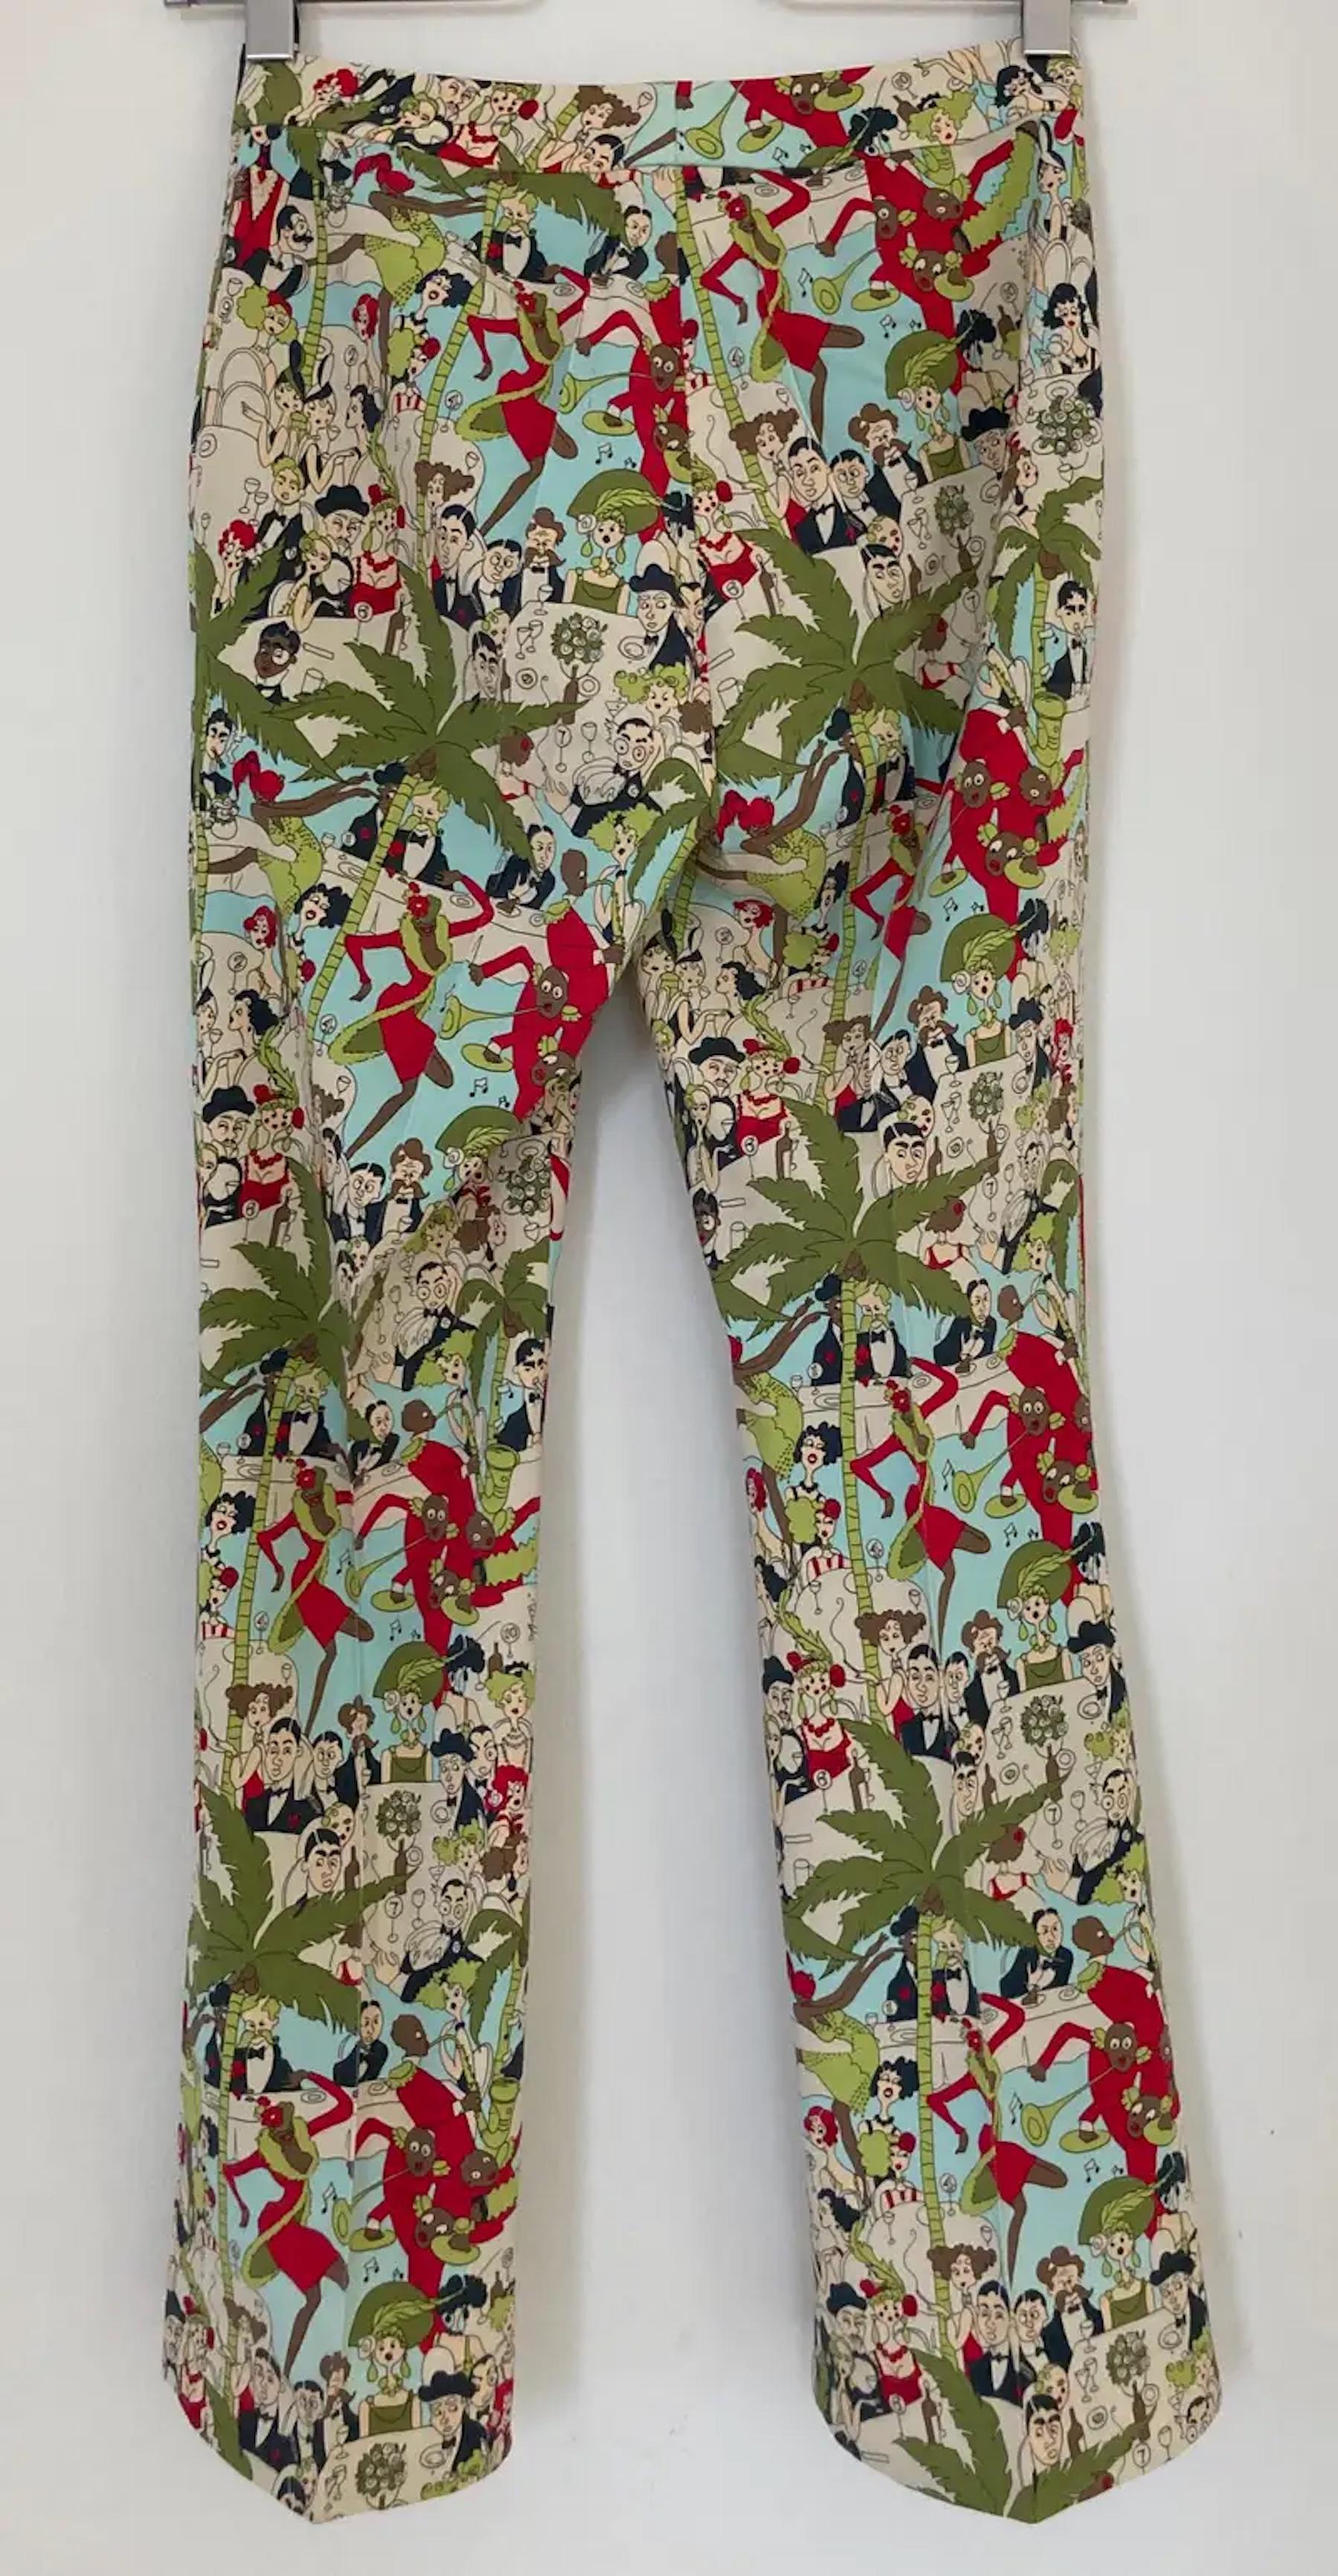 John Galliano Cafe Society Print Vintage Pants, Rare Trousers, 1999's In Excellent Condition For Sale In North Hollywood, CA